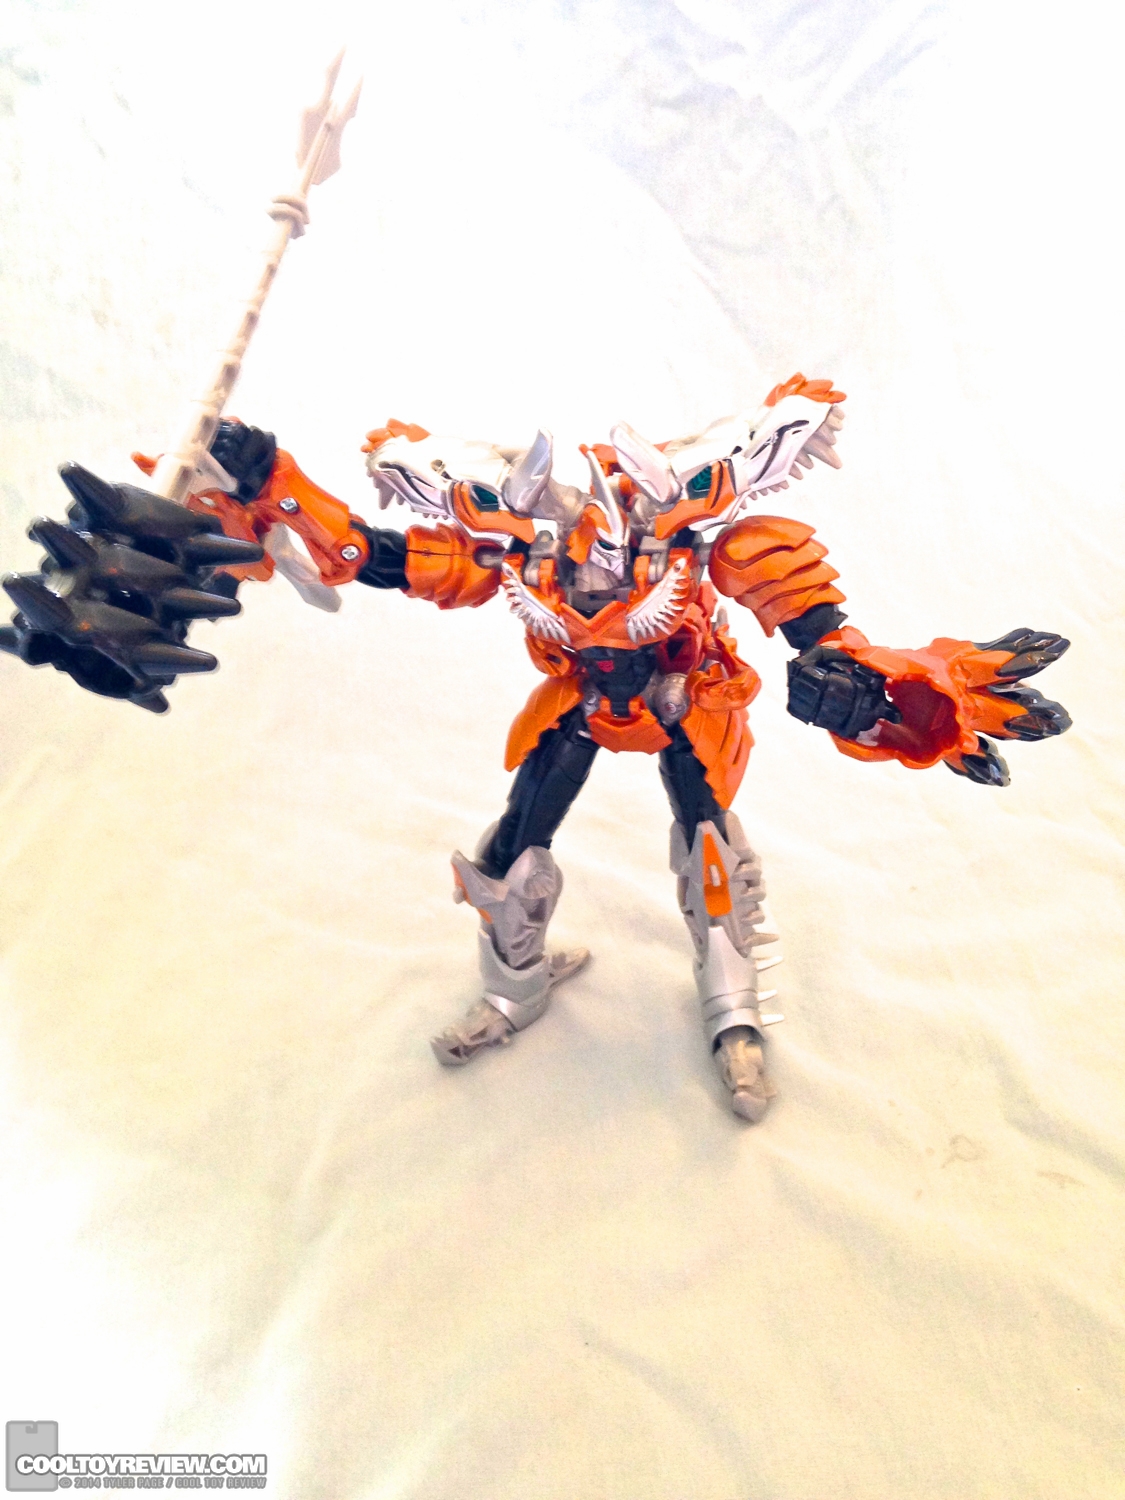 Transformers-Age-of-Extinction-Hasbro-Action-Figures-Review-014.jpg